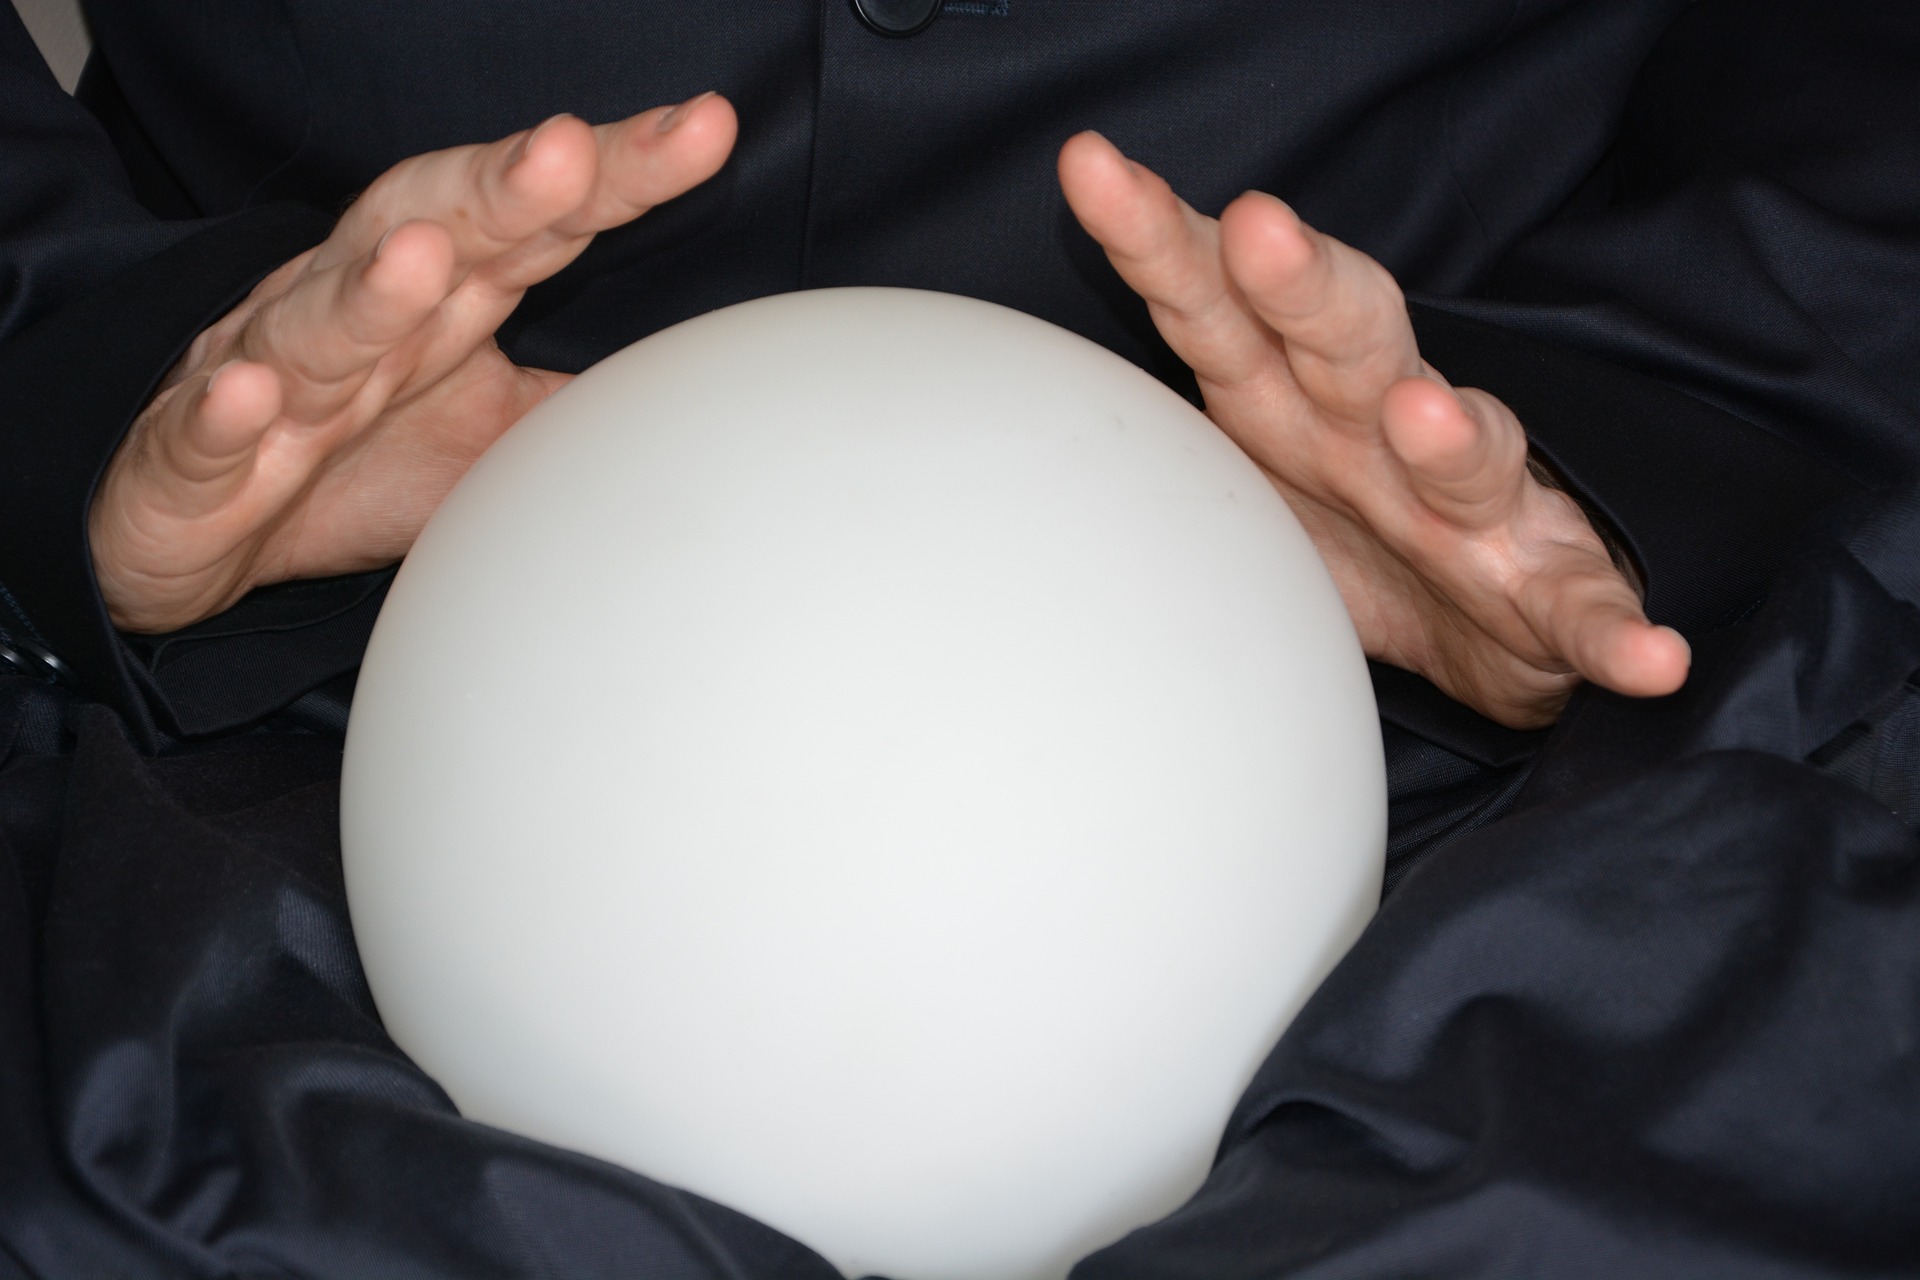 What Do Crystal Balls Symbolize? What Is Their Meaning?